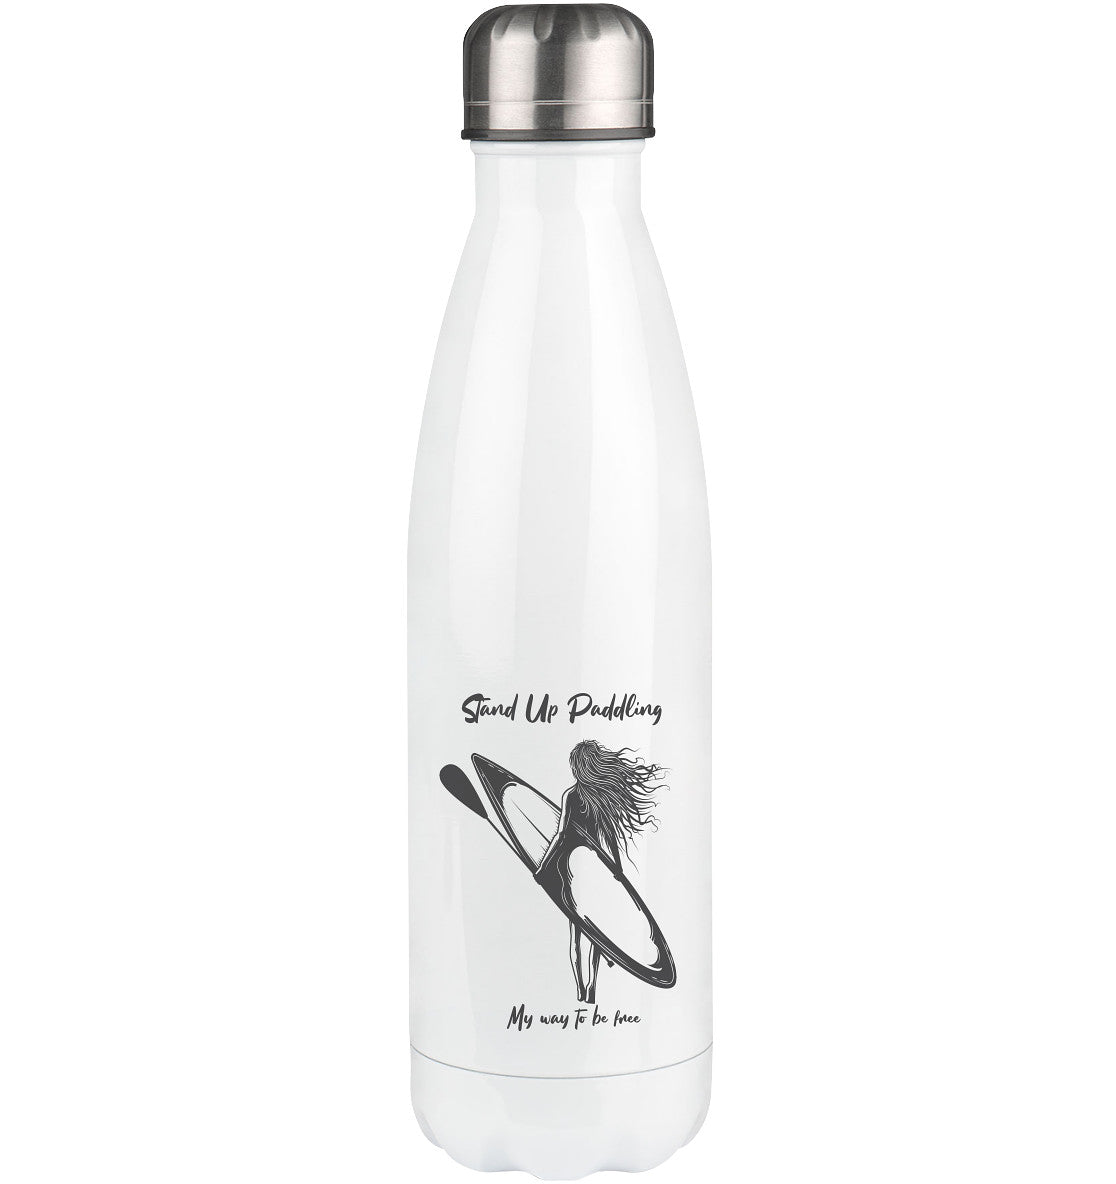 Stand Up Paddling- My way to be free - Thermoflasche 500ml